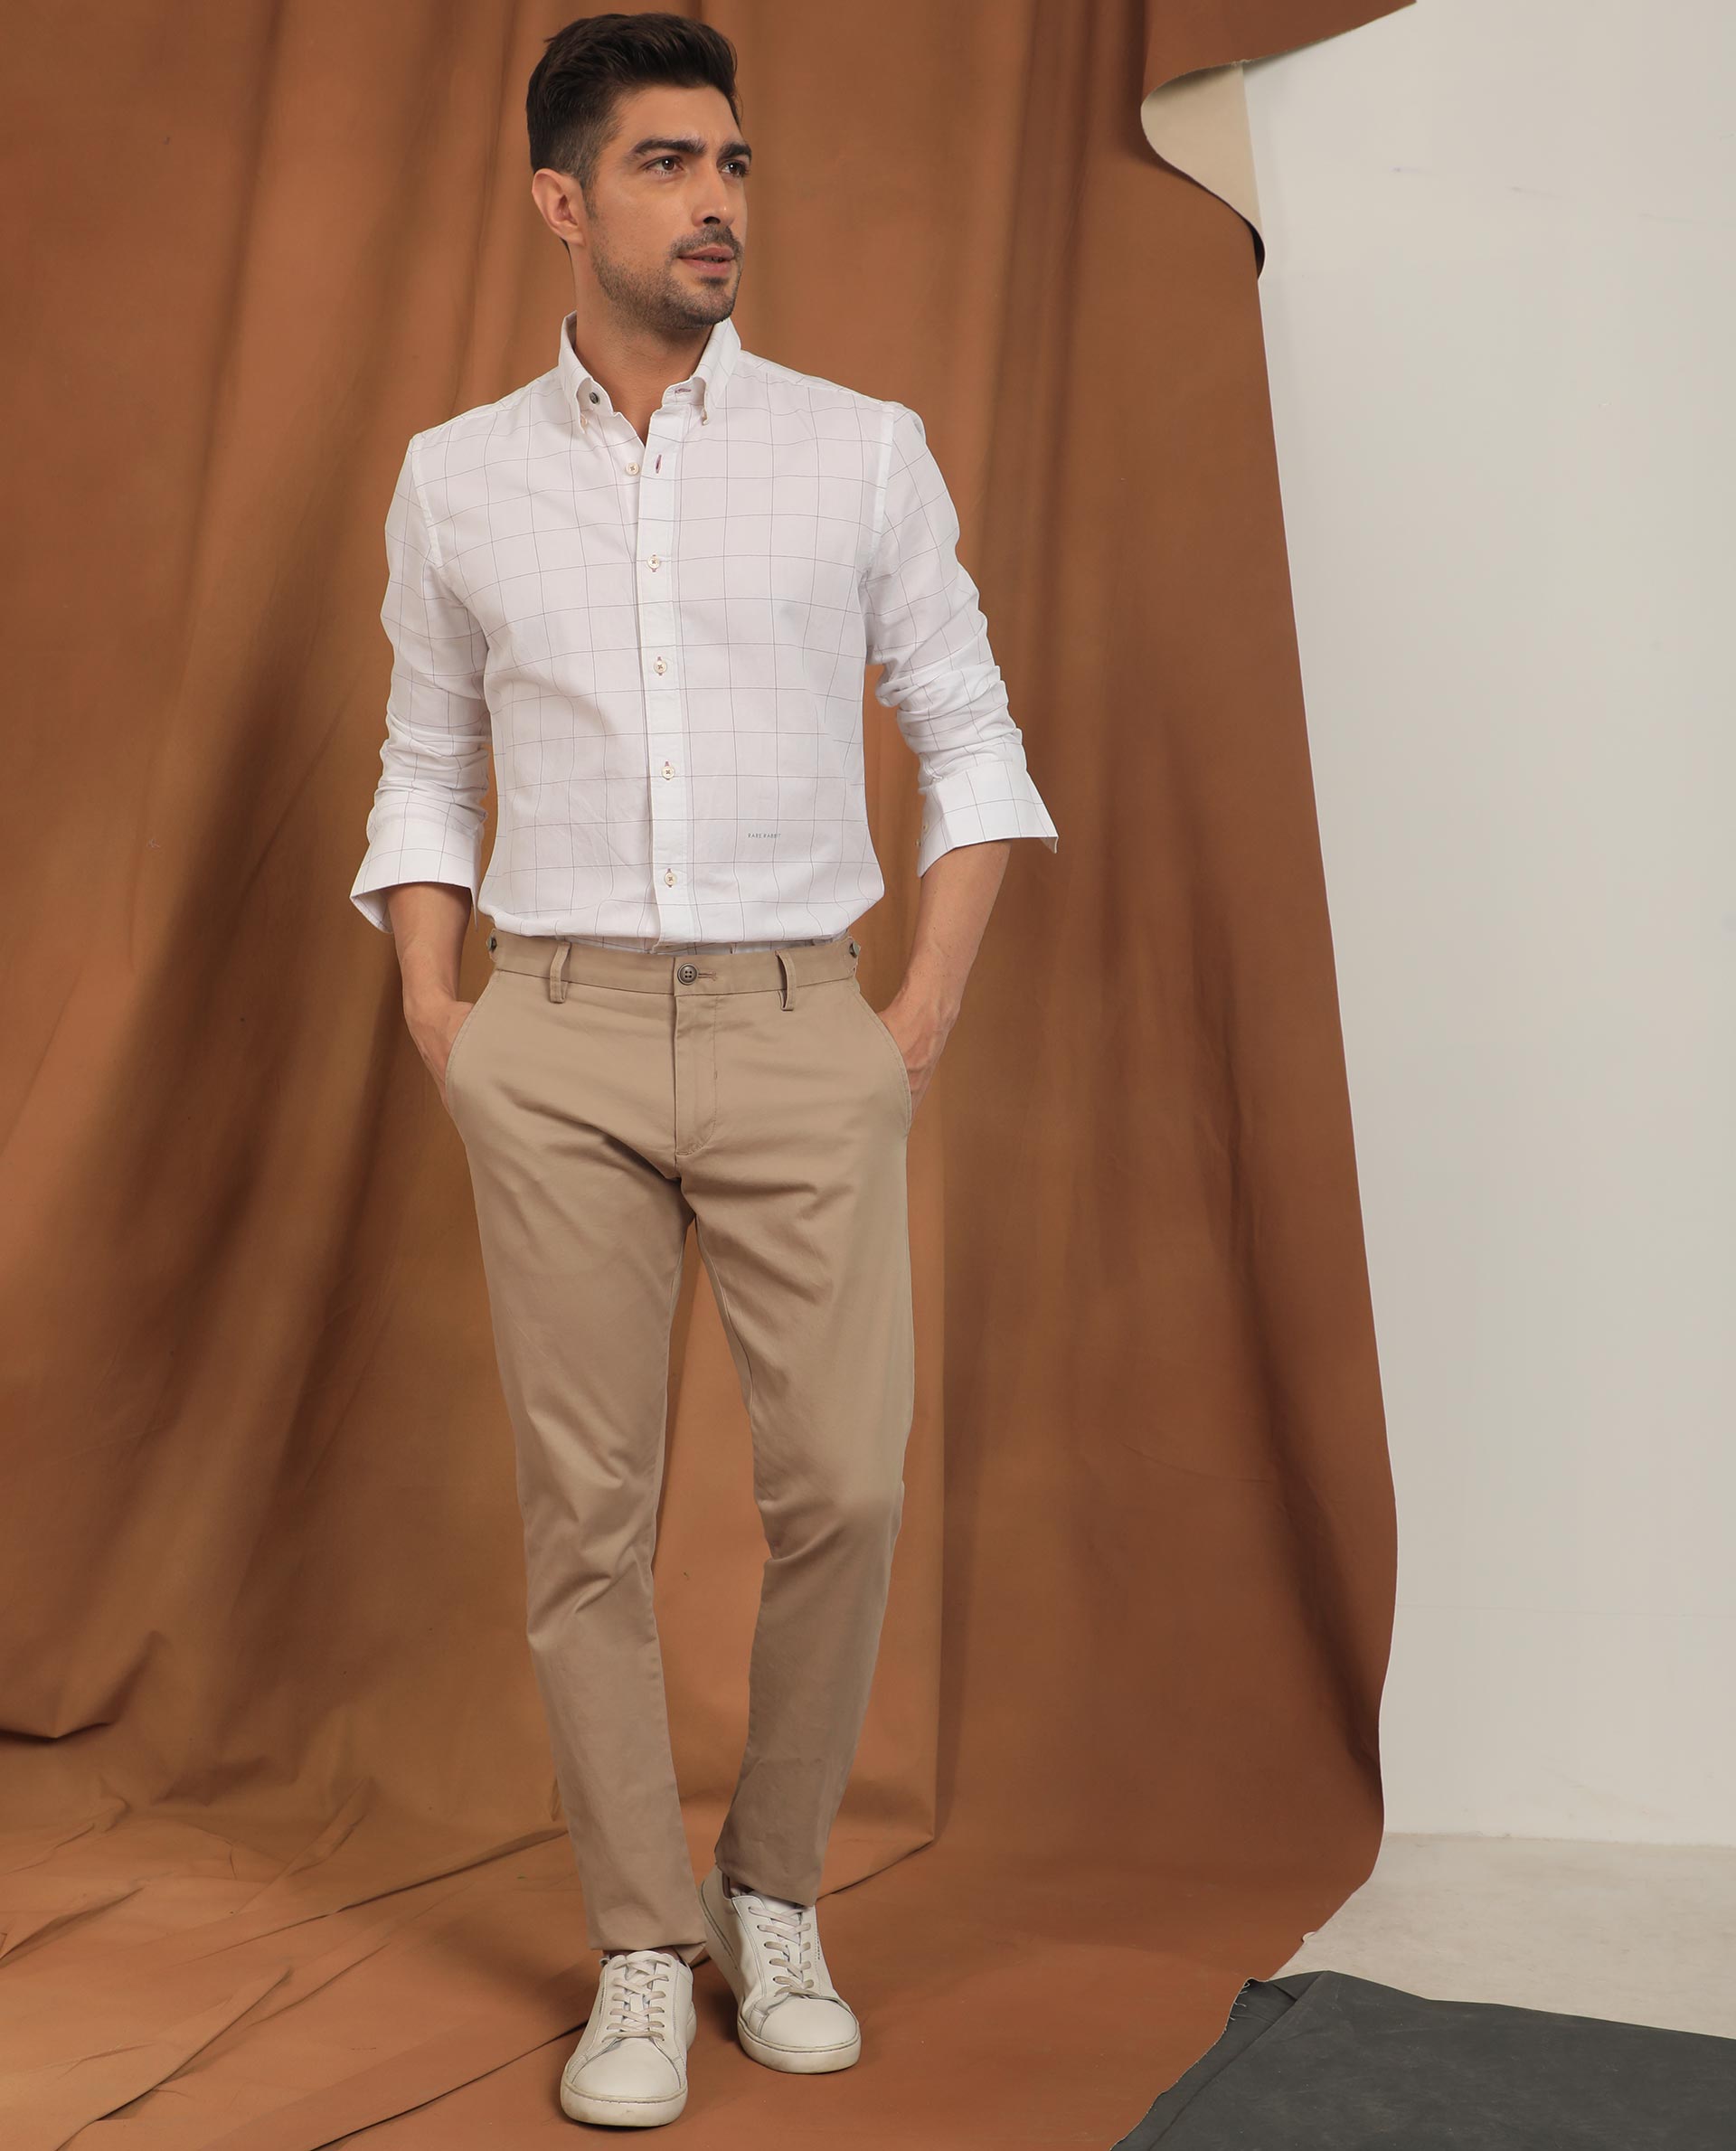 Man - Man in white shirt and brown pants - CleanPNG / KissPNG